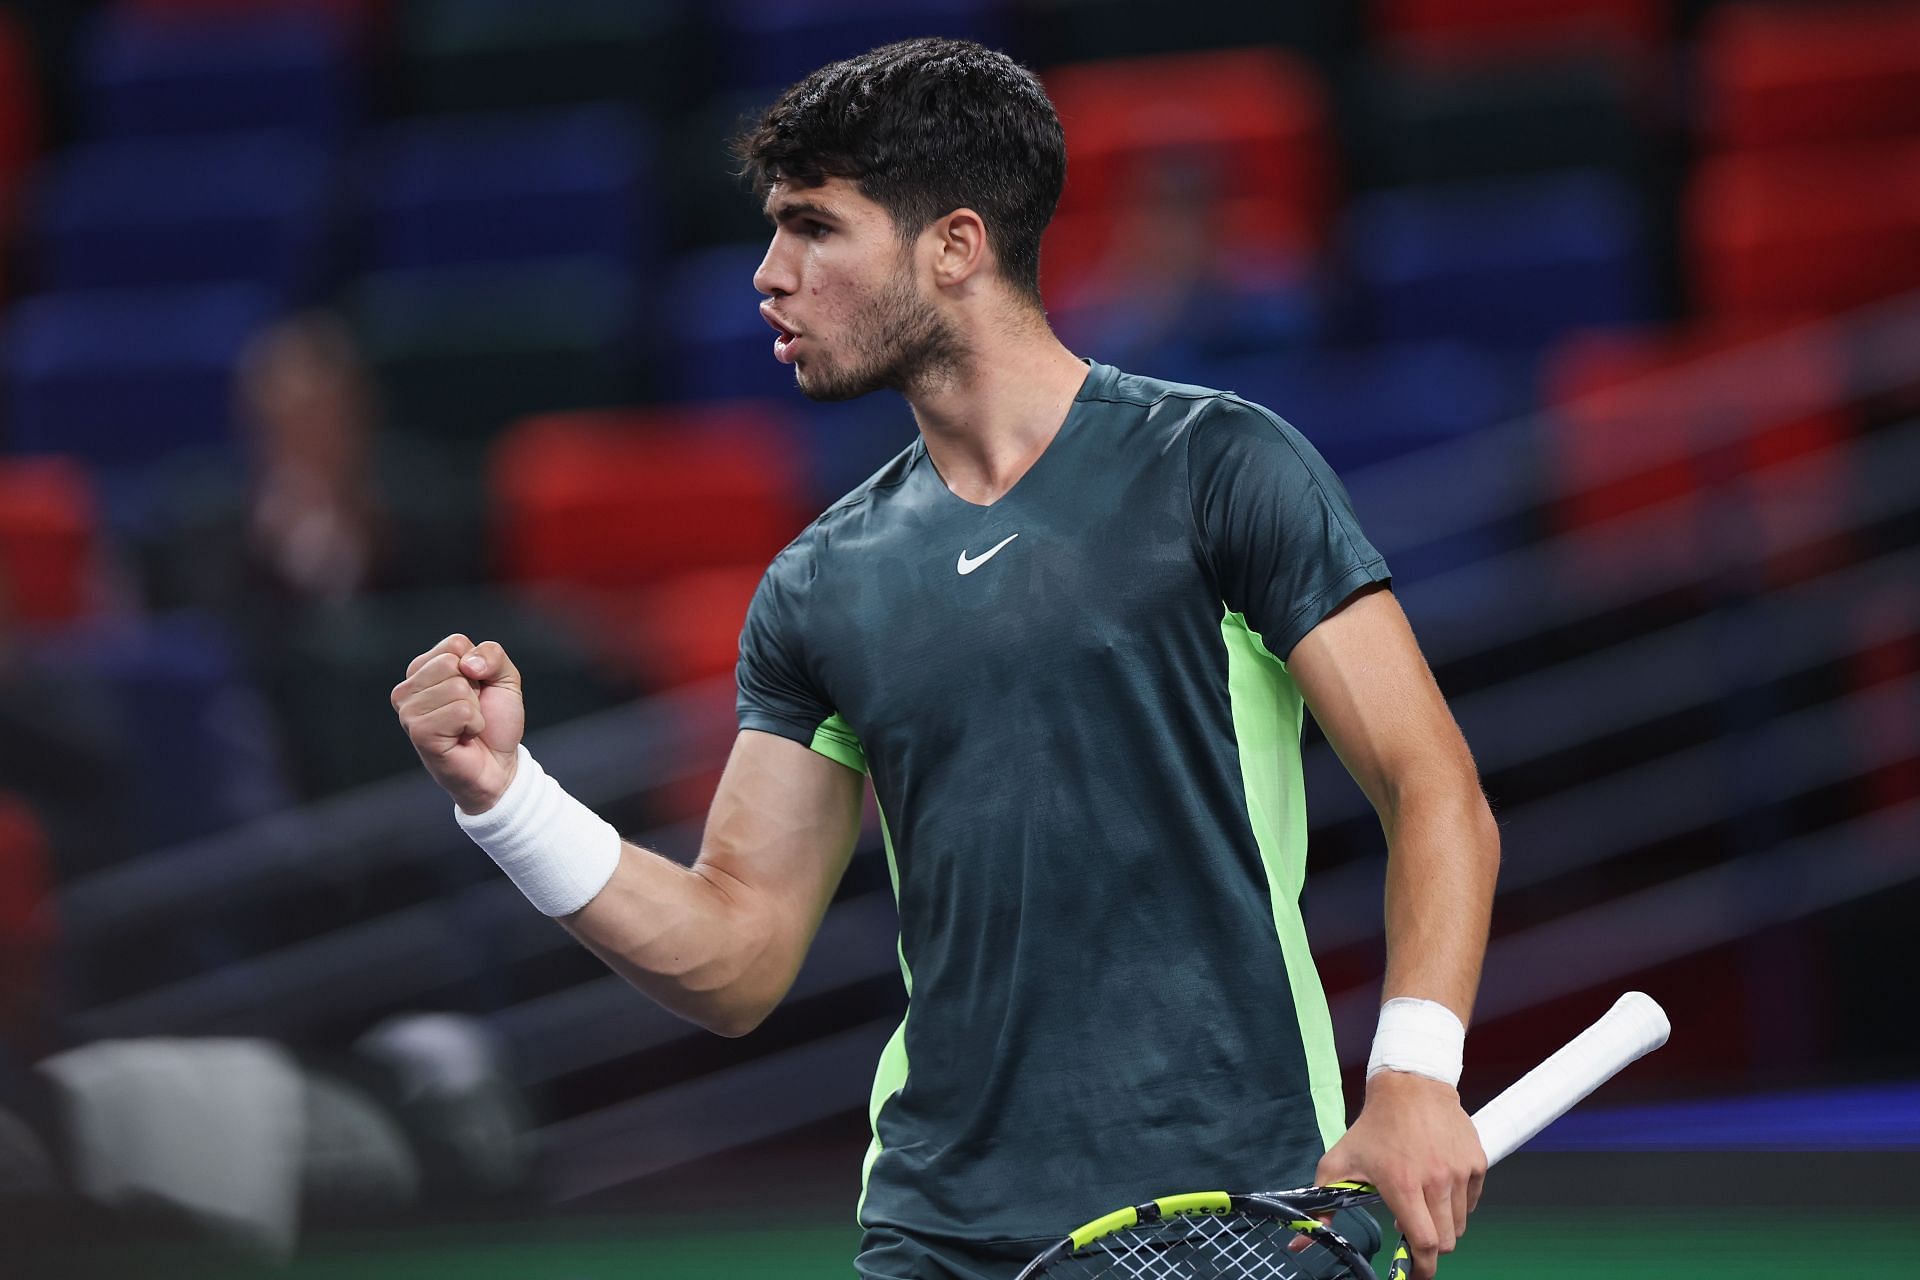 2023 Shanghai Rolex Masters - Day 8 2023 China Open - Day 6